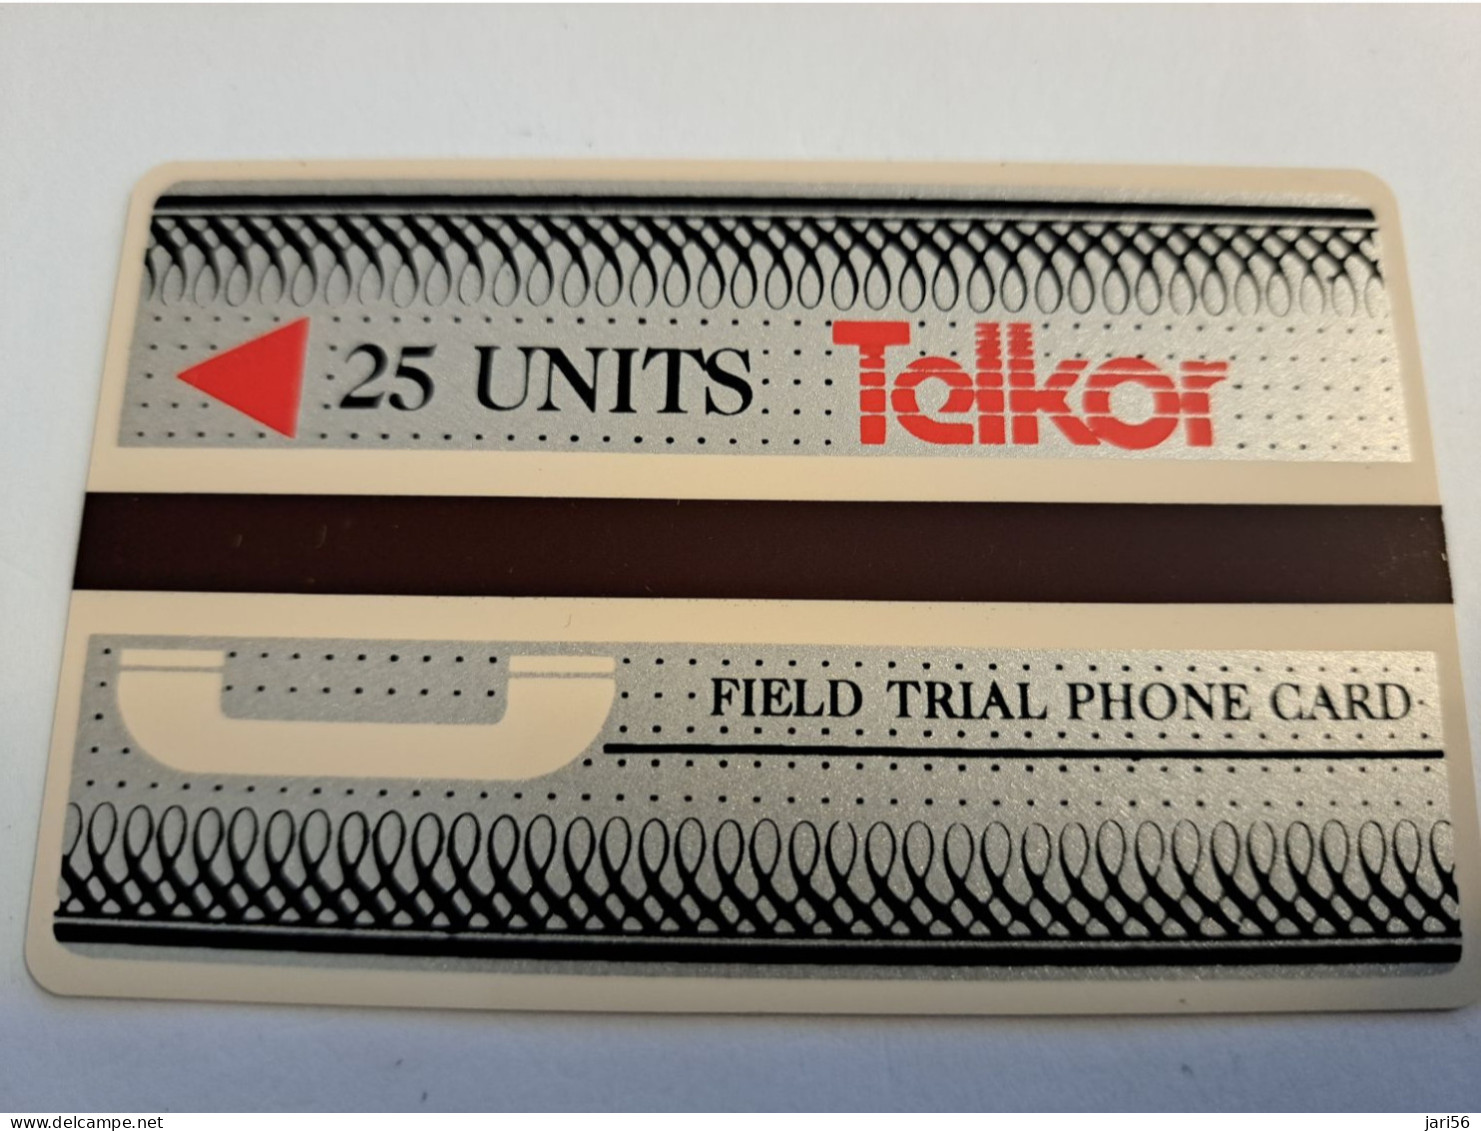 SOUTH AFRIKA  FIELD TRIAL CARD 25 UNITS TELKOR Red Arrow     1CARD Used **16048** - South Africa